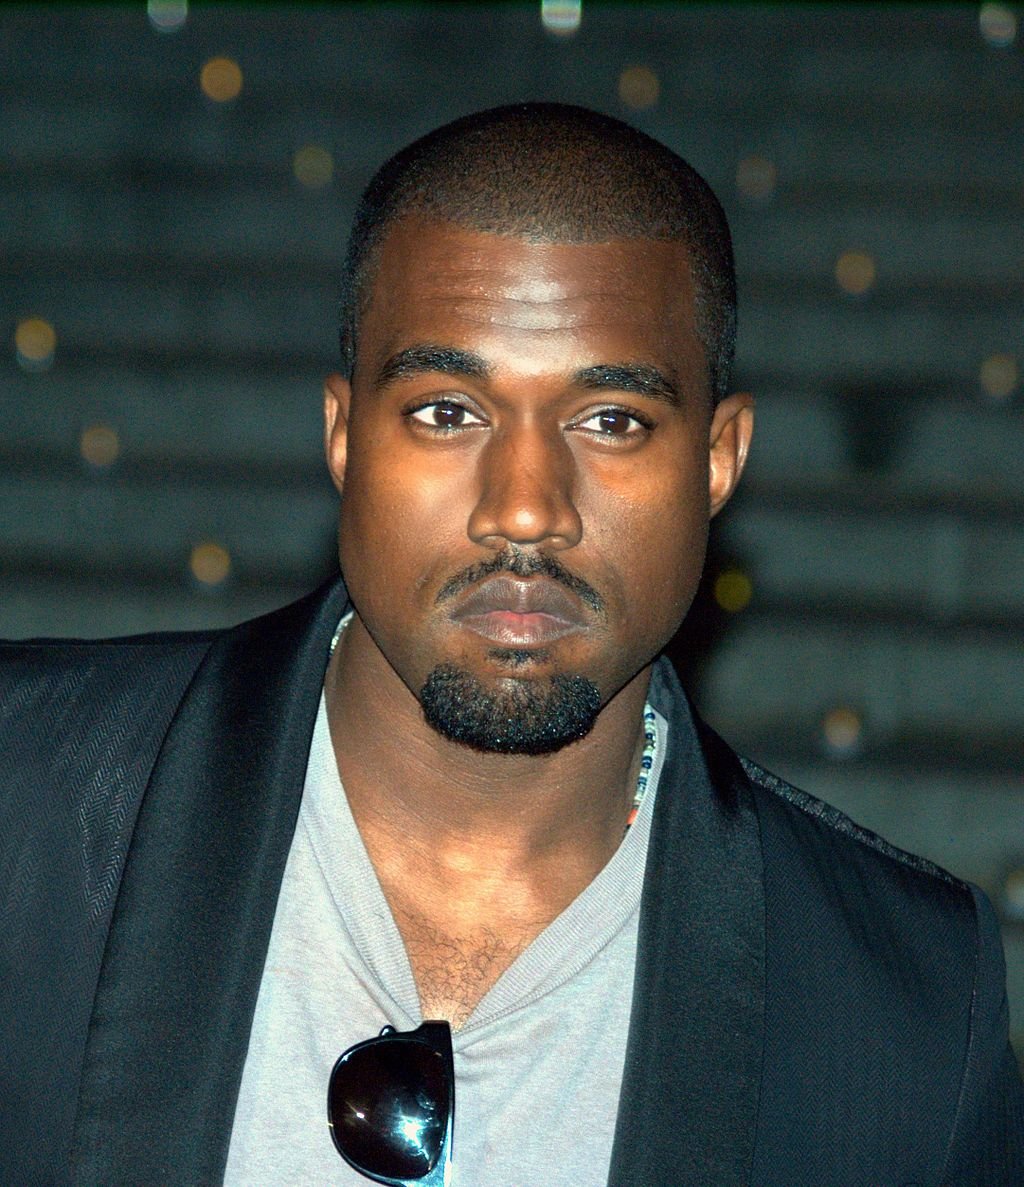 Kanye West Announces Joining US Presidential Race 2020